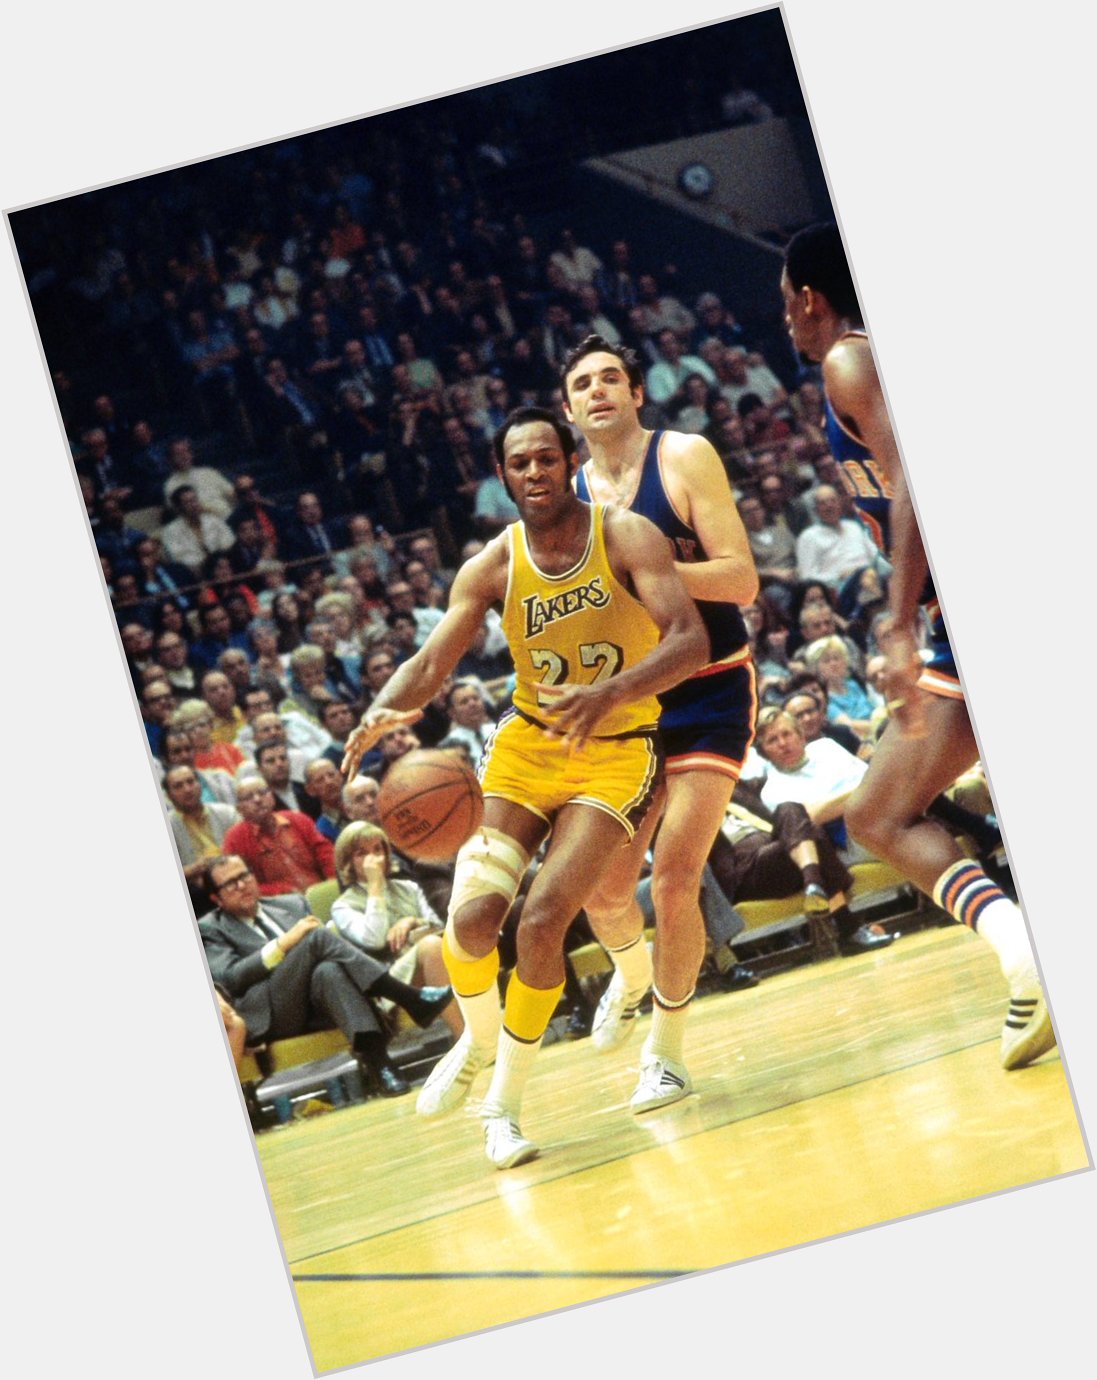 To wish Elgin Baylor a Happy Birthday!  : Wen Roberts/NBAE via Getty Images 